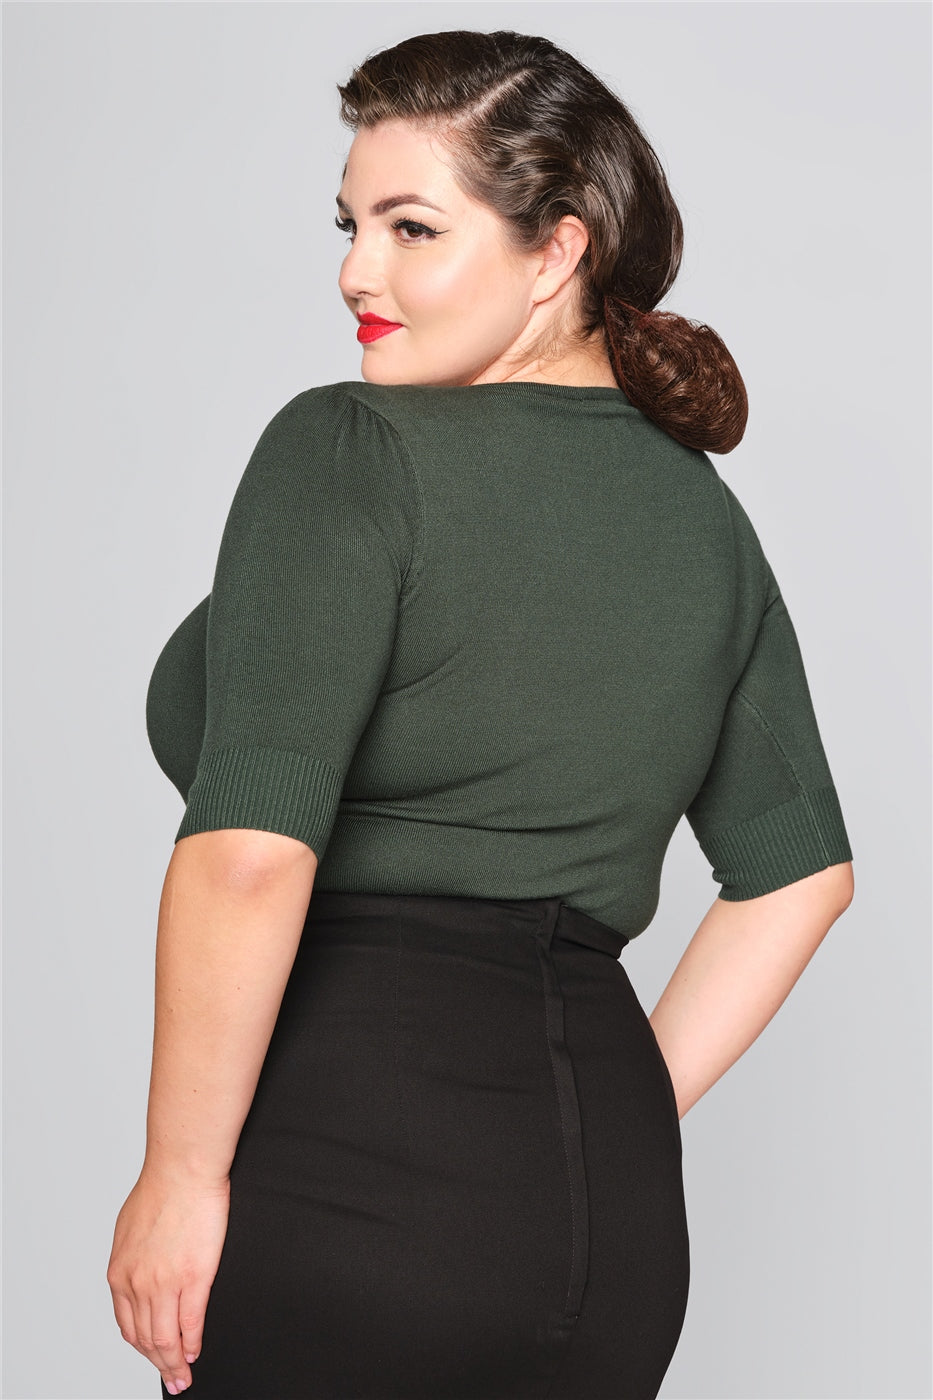 Chrissie Plain Green Top by Collectif